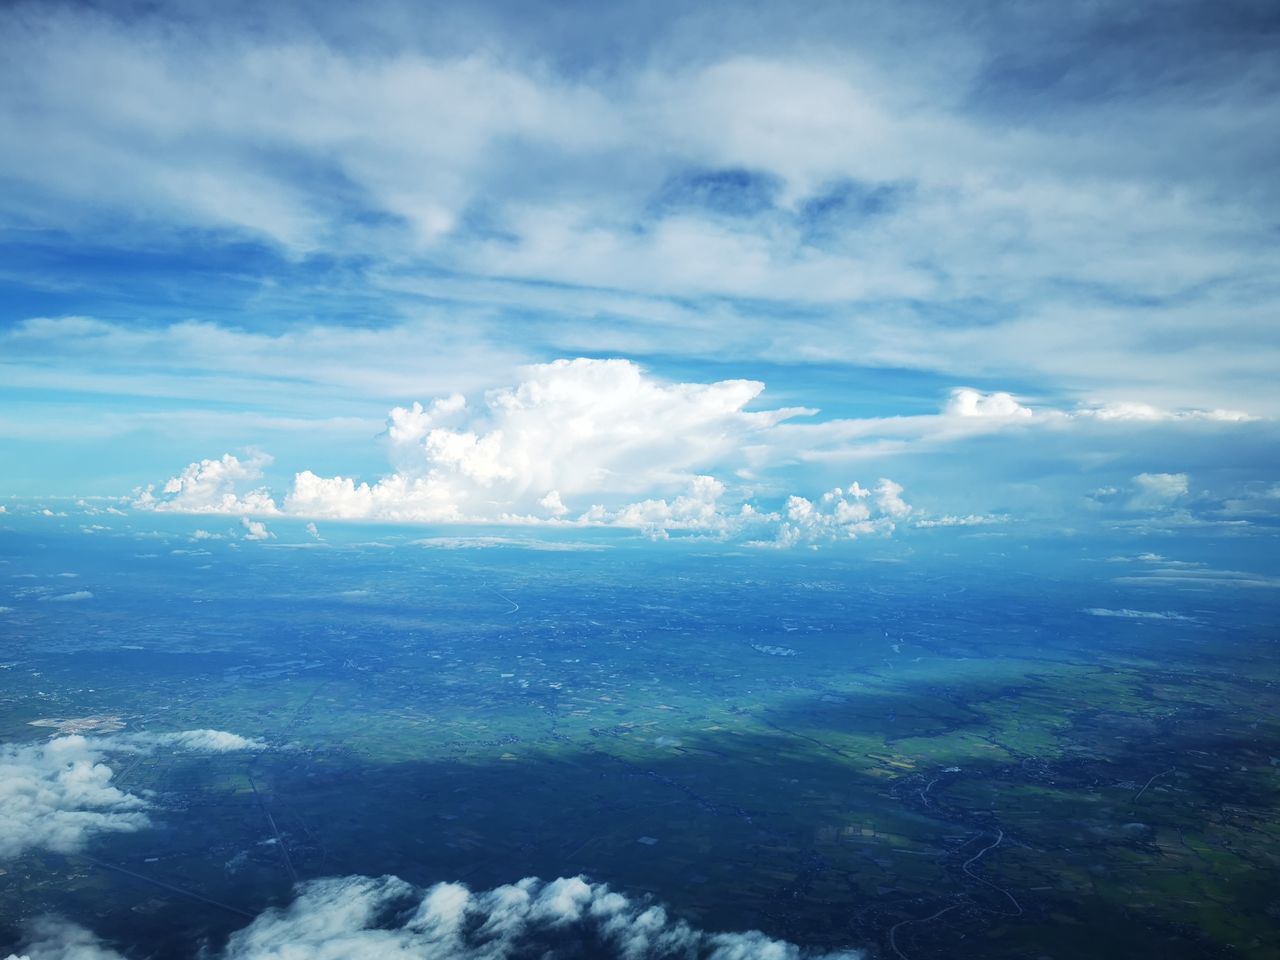 sky, cloud, horizon, environment, scenics - nature, nature, landscape, beauty in nature, aerial view, cloudscape, blue, sea, water, no people, tranquility, outdoors, sunlight, travel, day, mountain, land, ocean, tranquil scene, idyllic, plain, high up, airplane, backgrounds, overcast, dramatic sky, high angle view, wind, mountain range